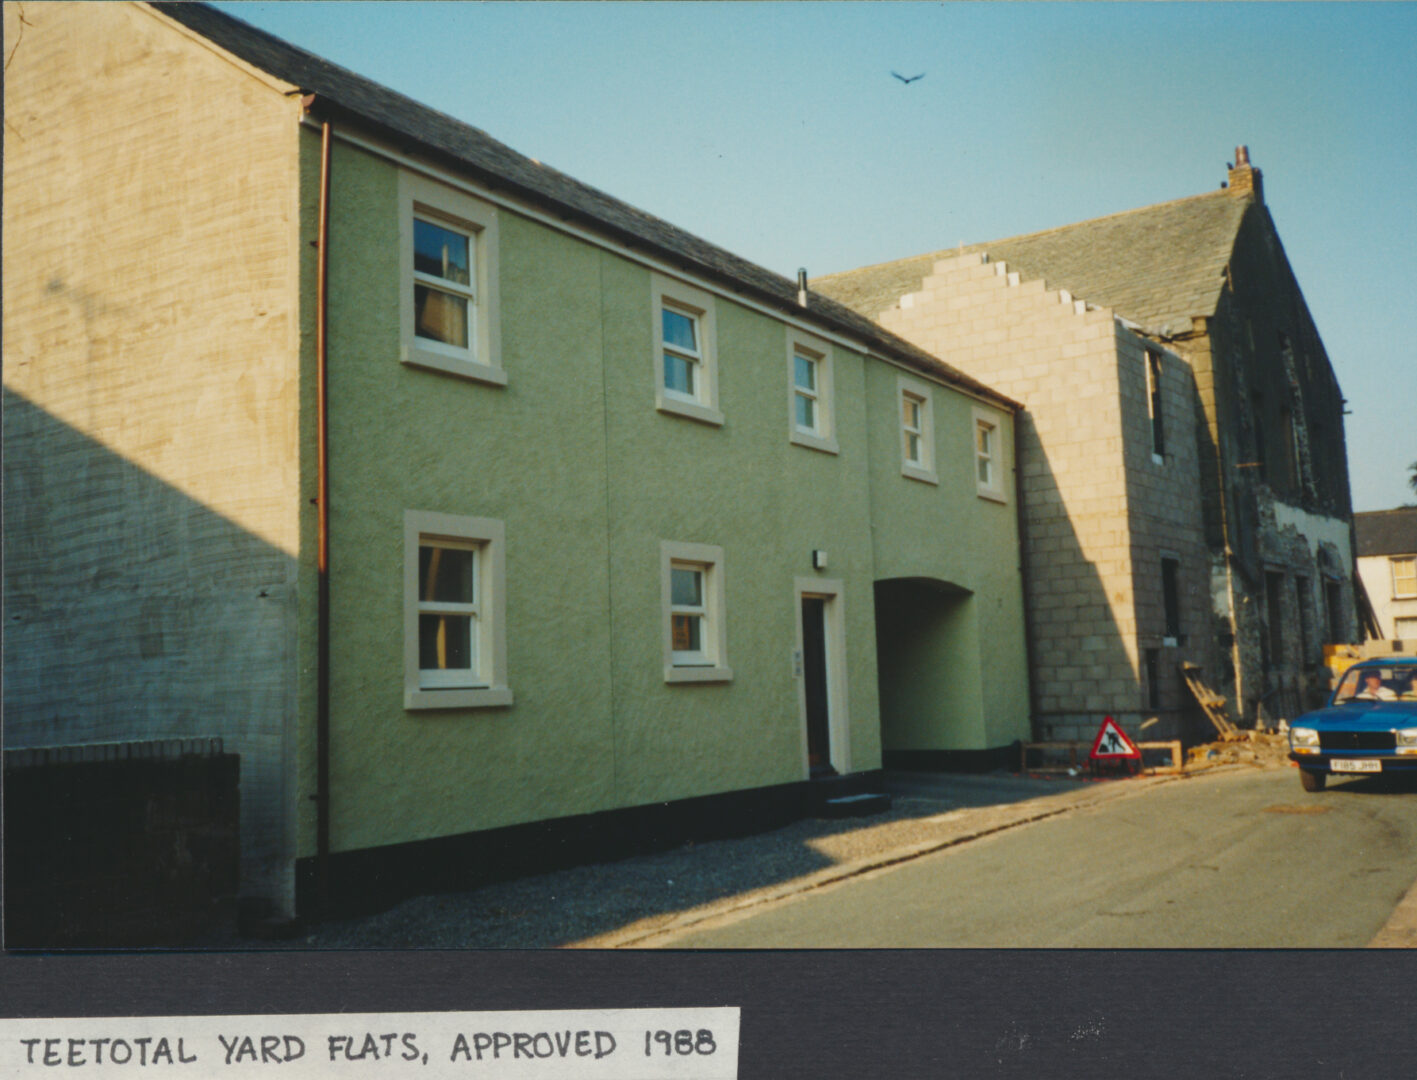 Teetotal Yard flats approved 1988 photo